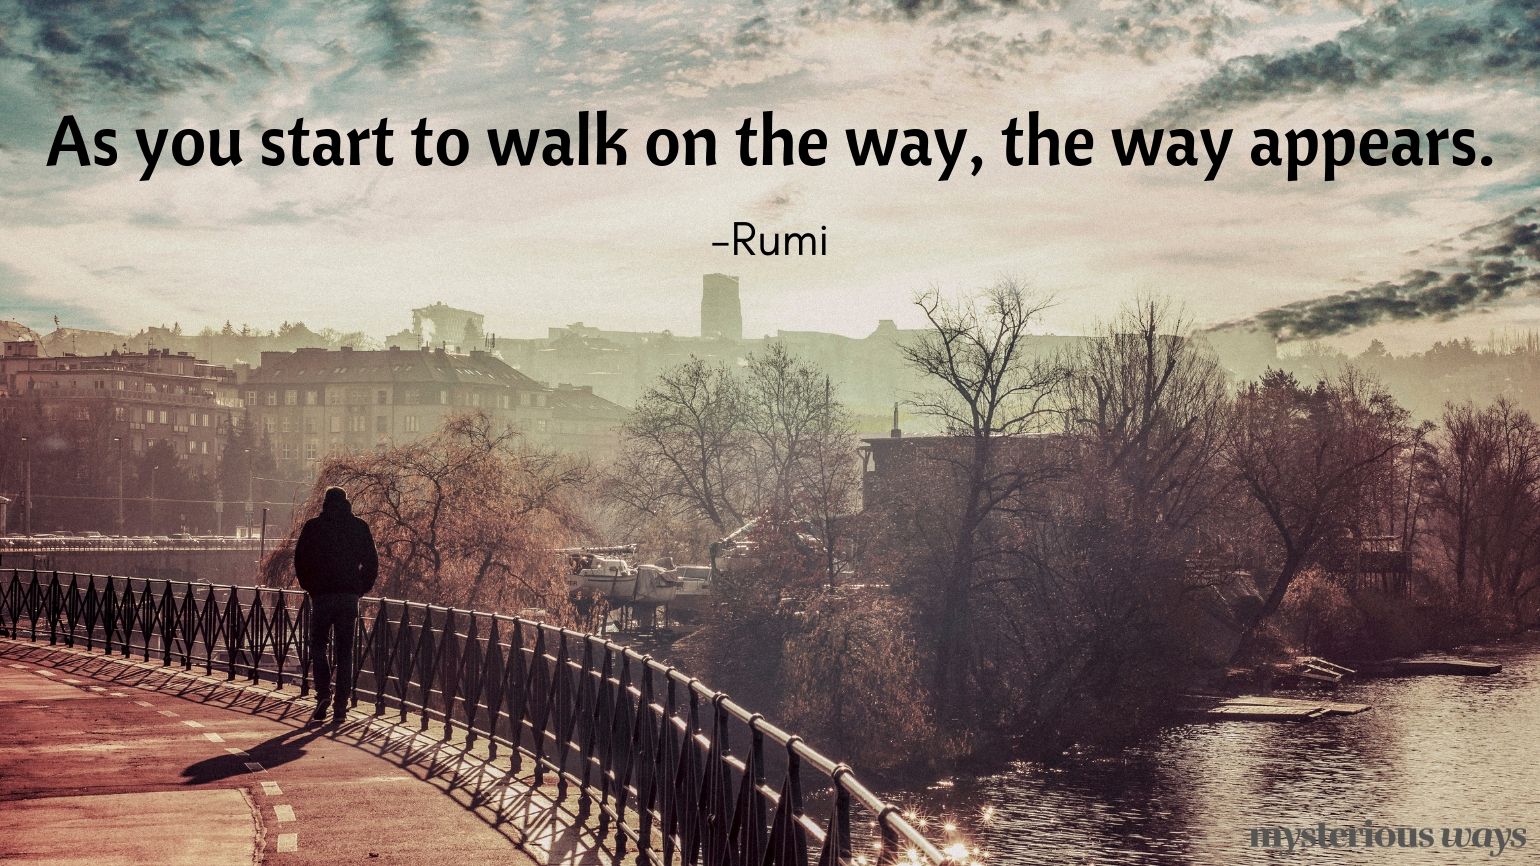 As you start to walk on the way, the way appears. —Rumi